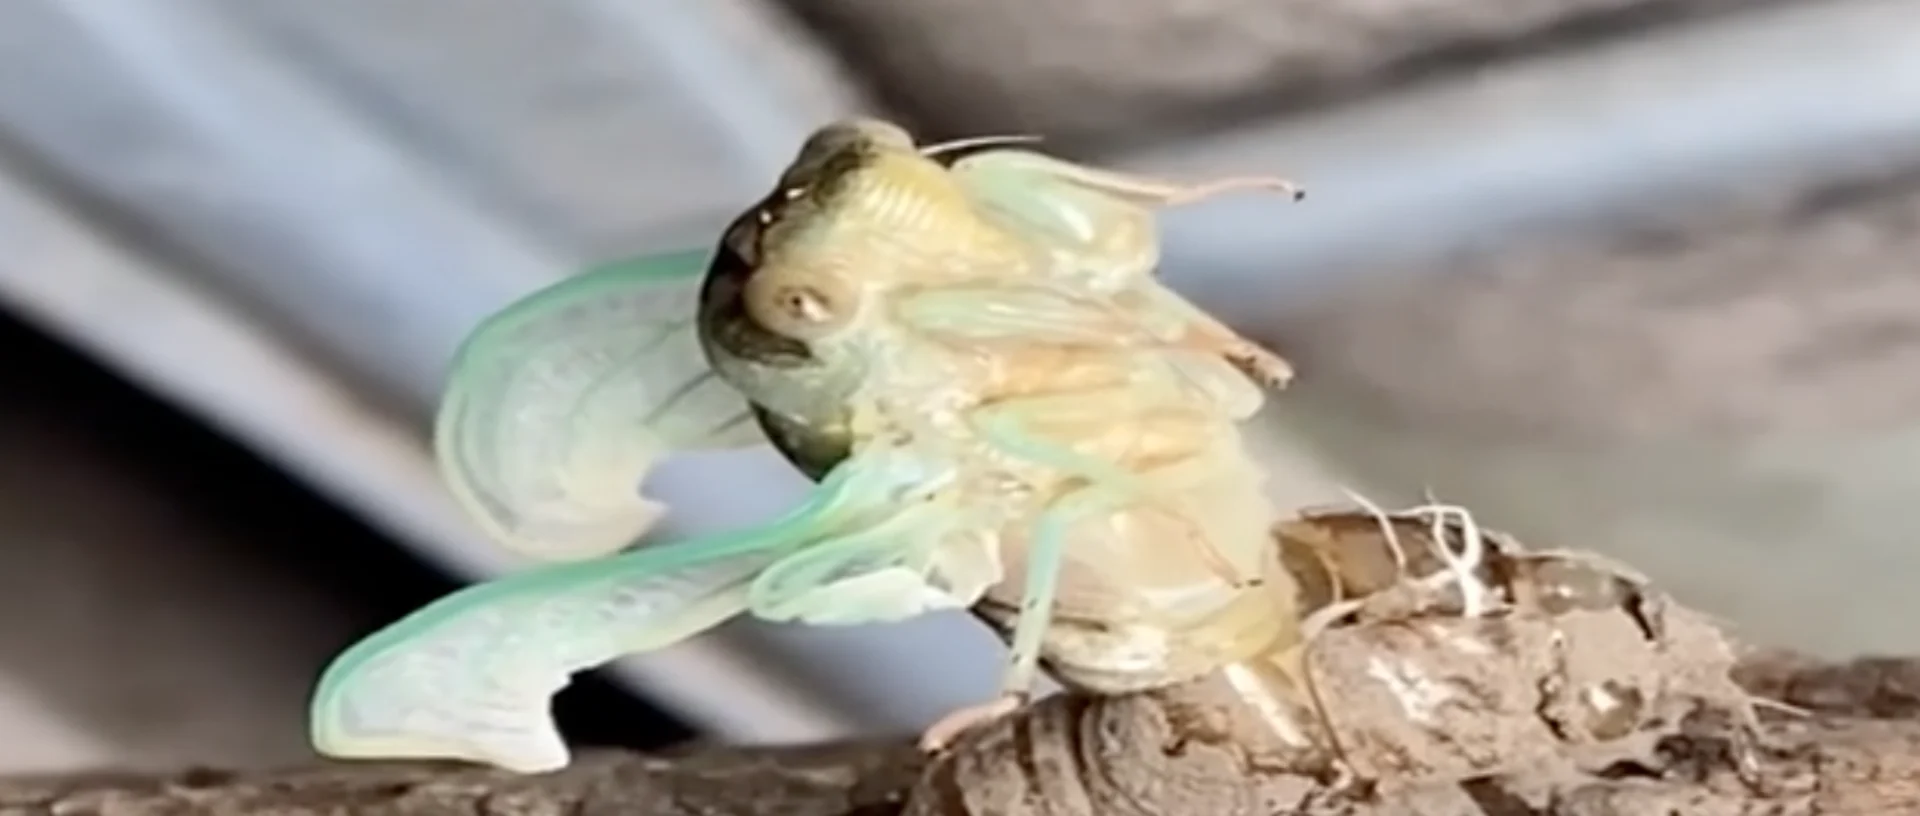 Watch incredible moment as cicada emerges from its exoskeleton